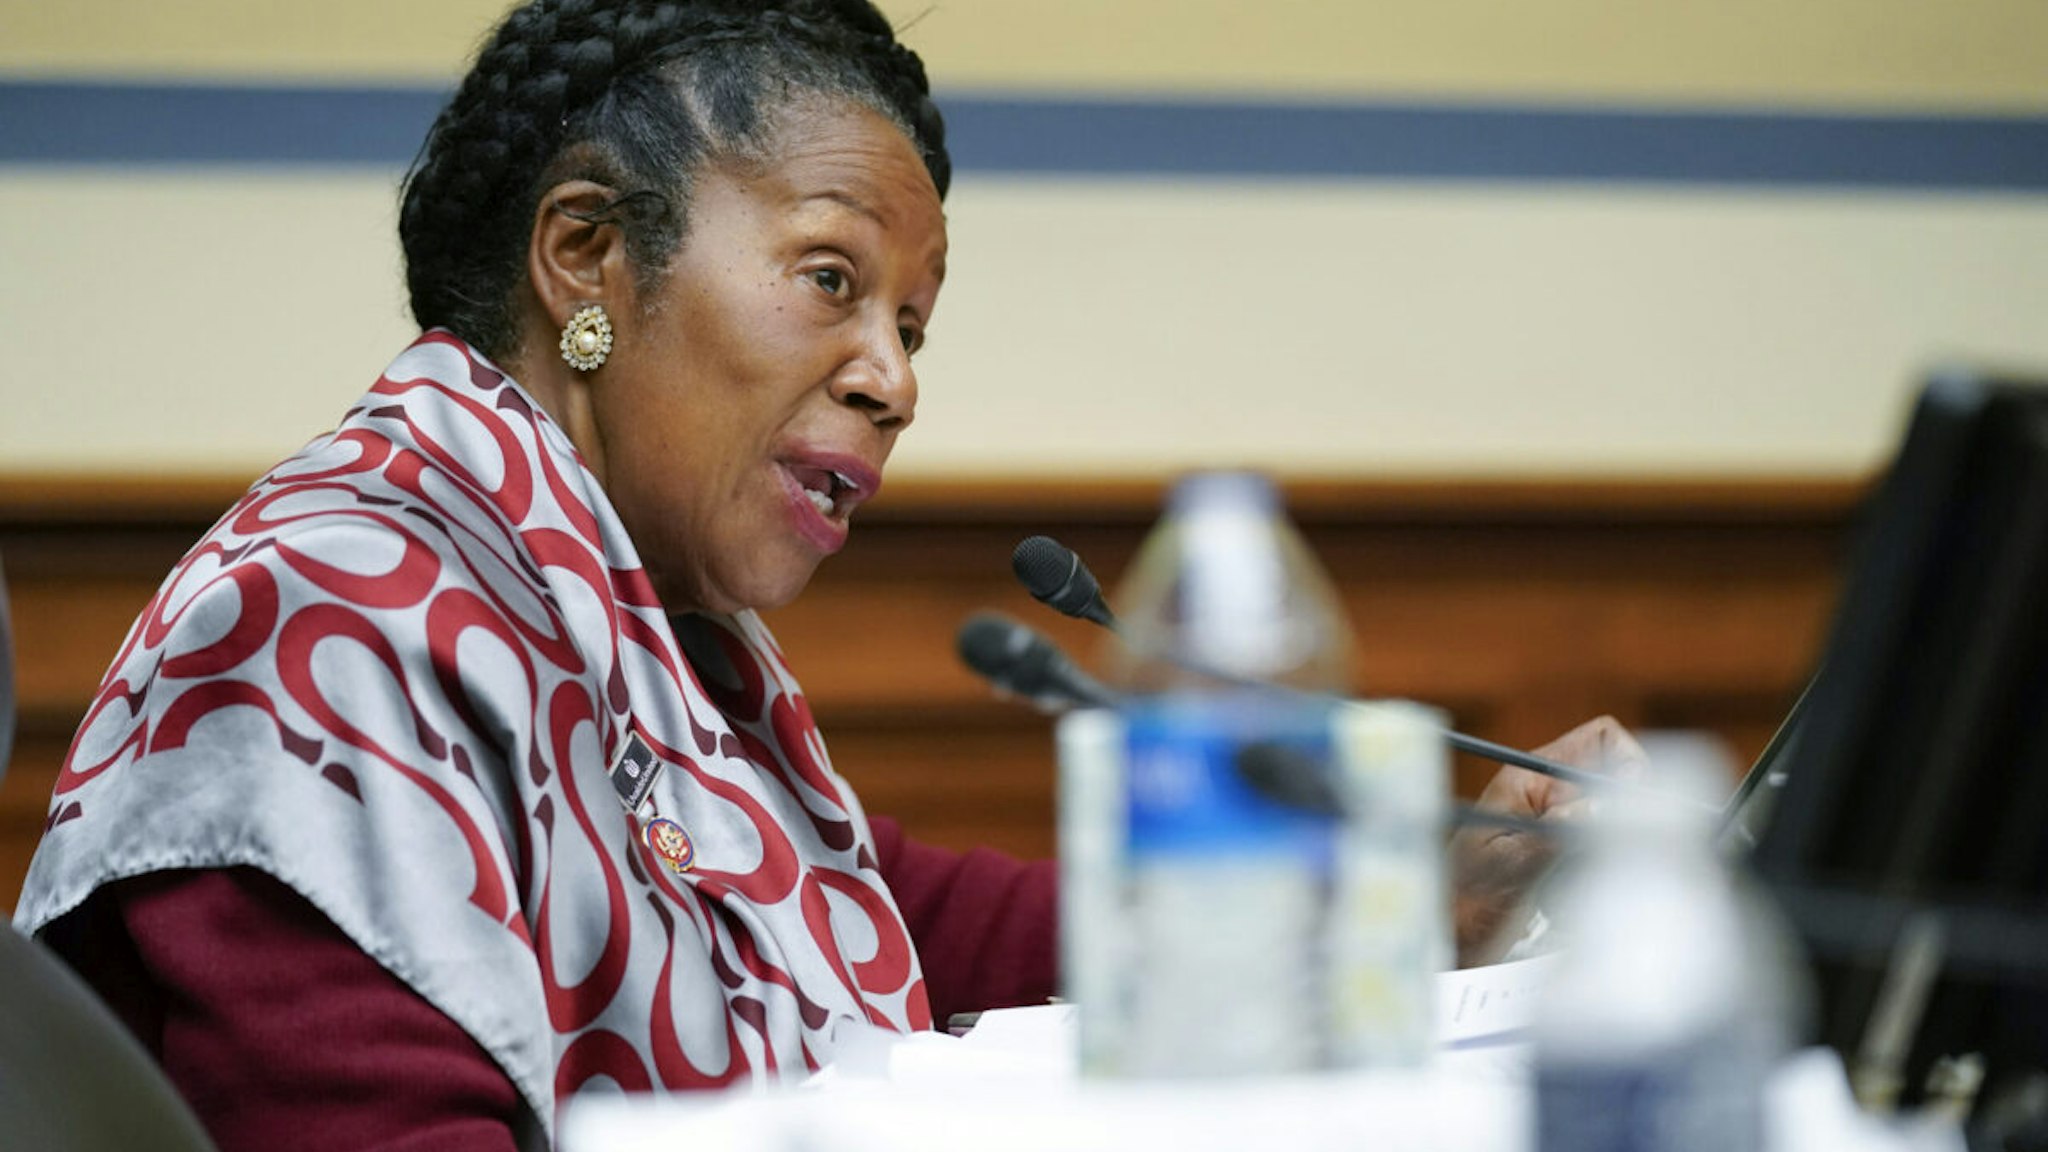 Rep. Sheila Jackson Lee (D-TX) speaks during a House Committee on Oversight and Reform hearing on gun violence on June 8, 2022 in Washington, DC.